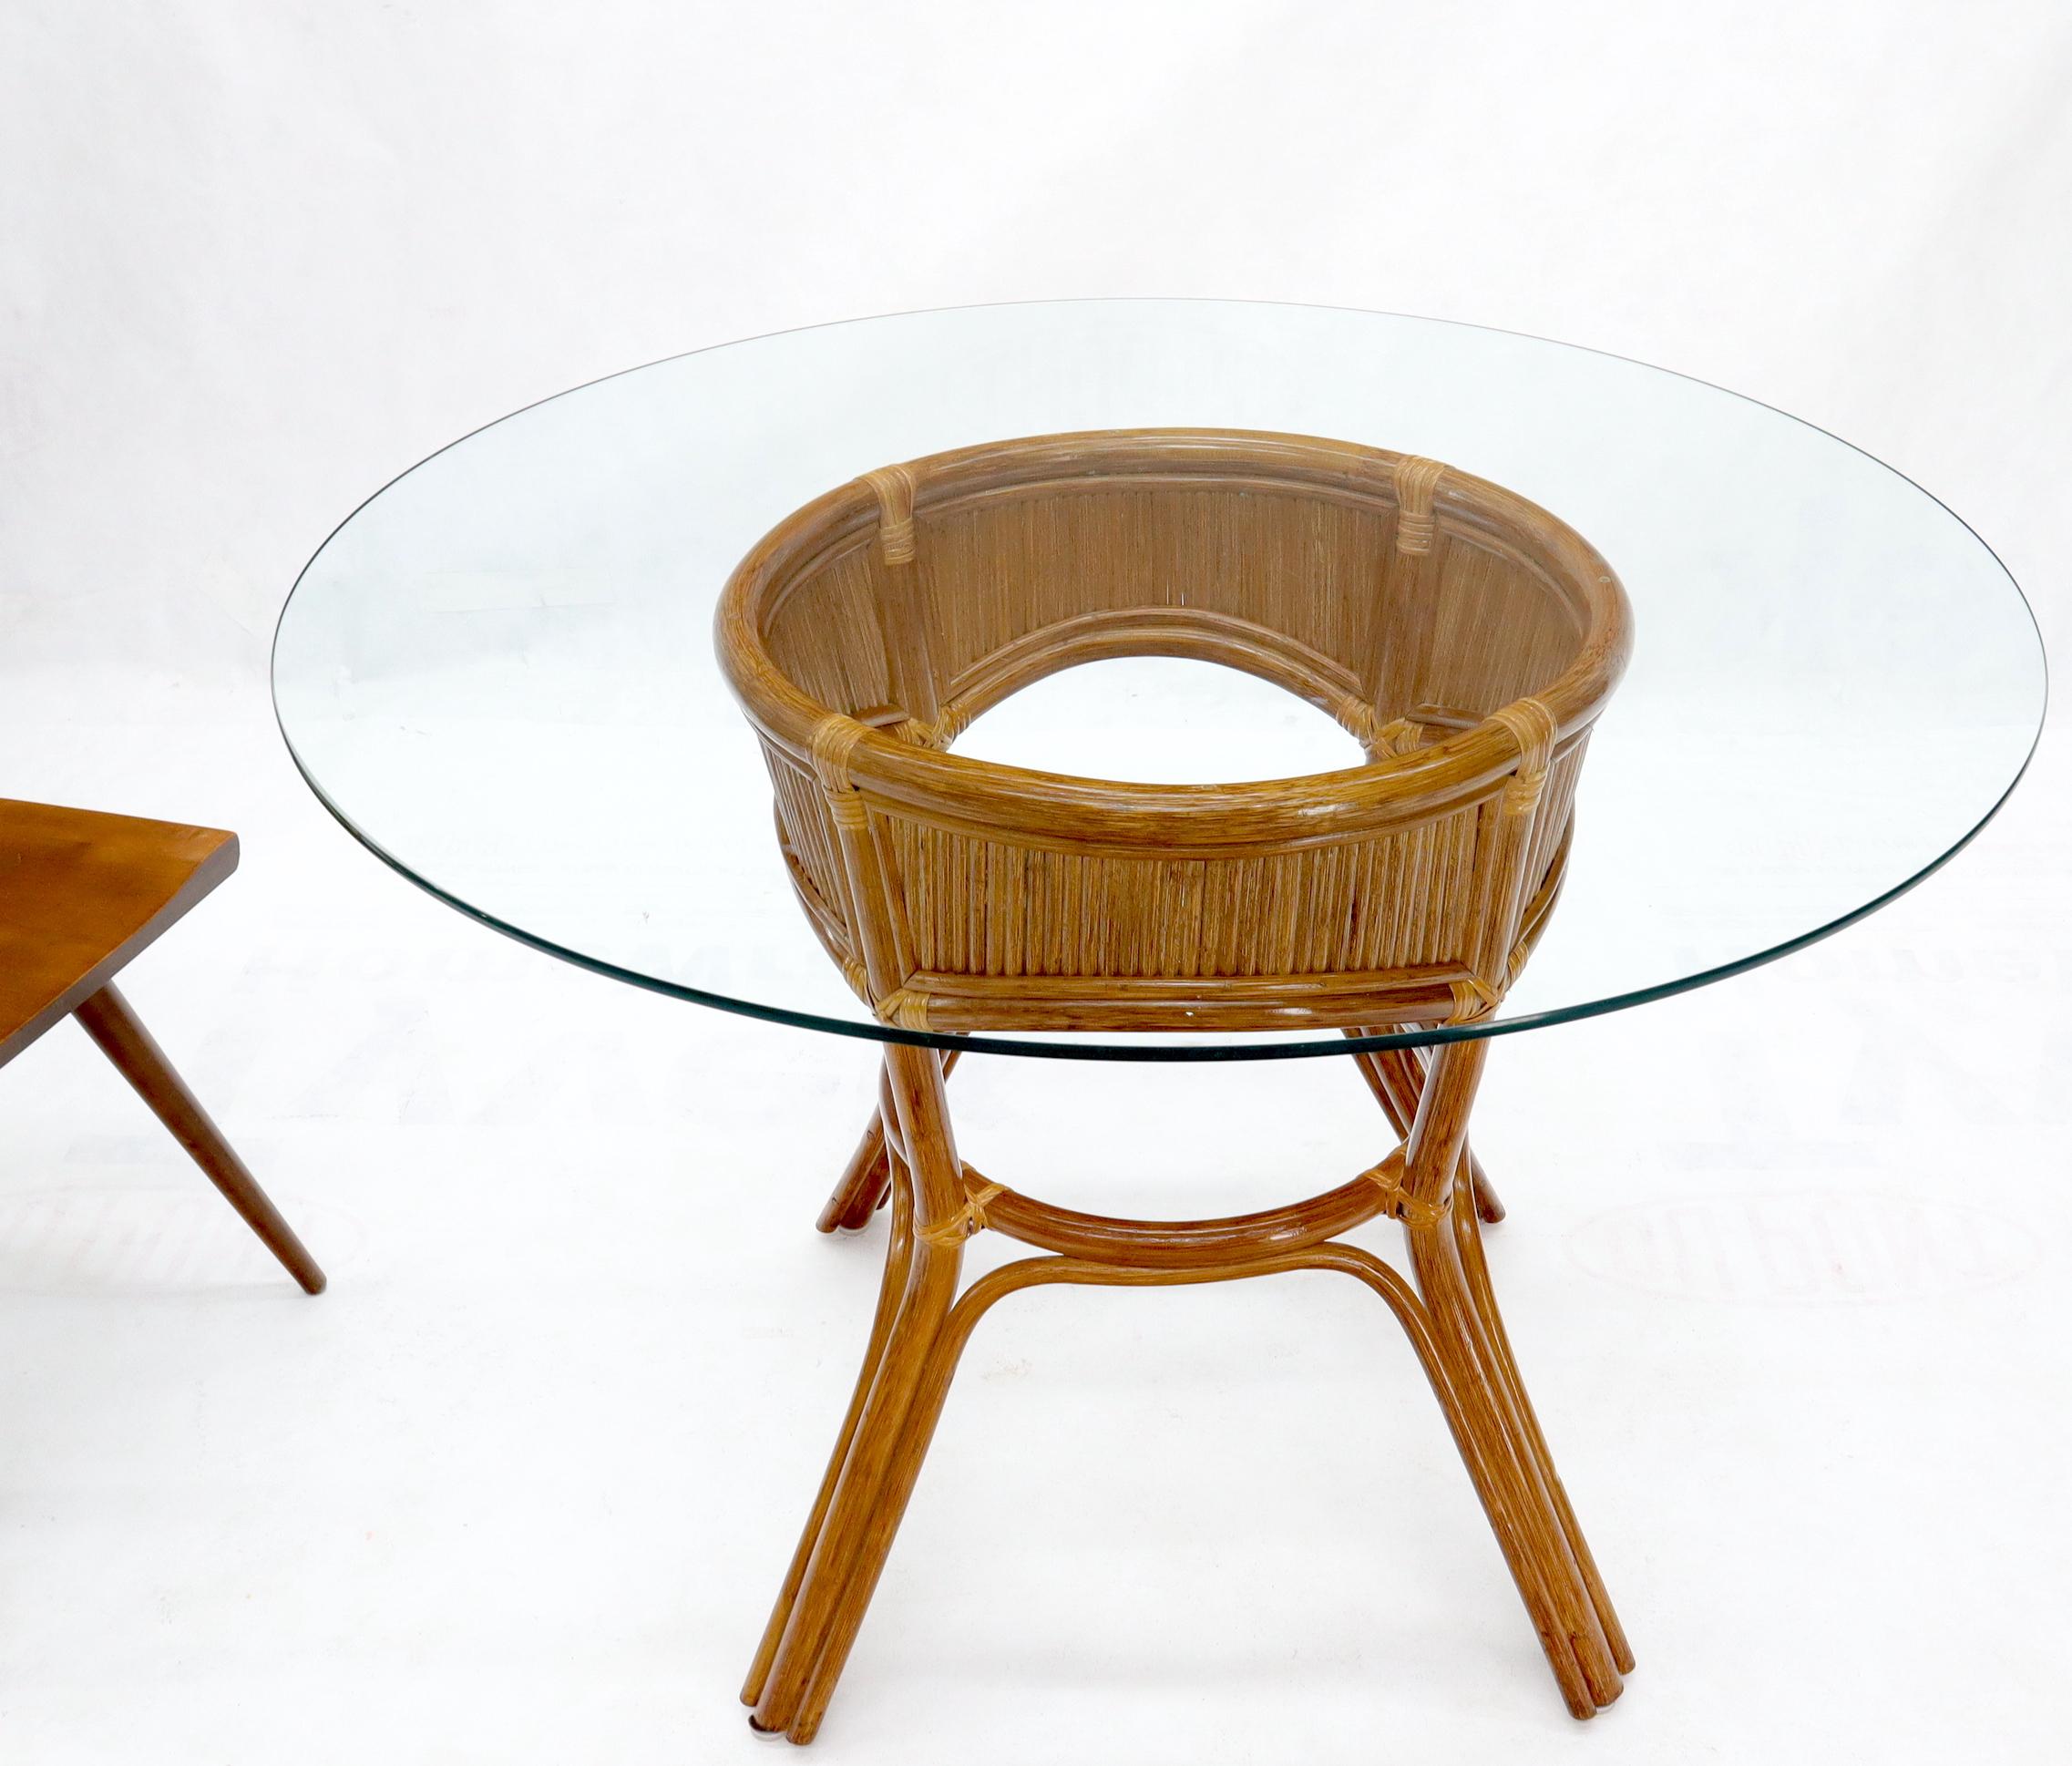 Bamboo rattan base round glass top dining dinette table.